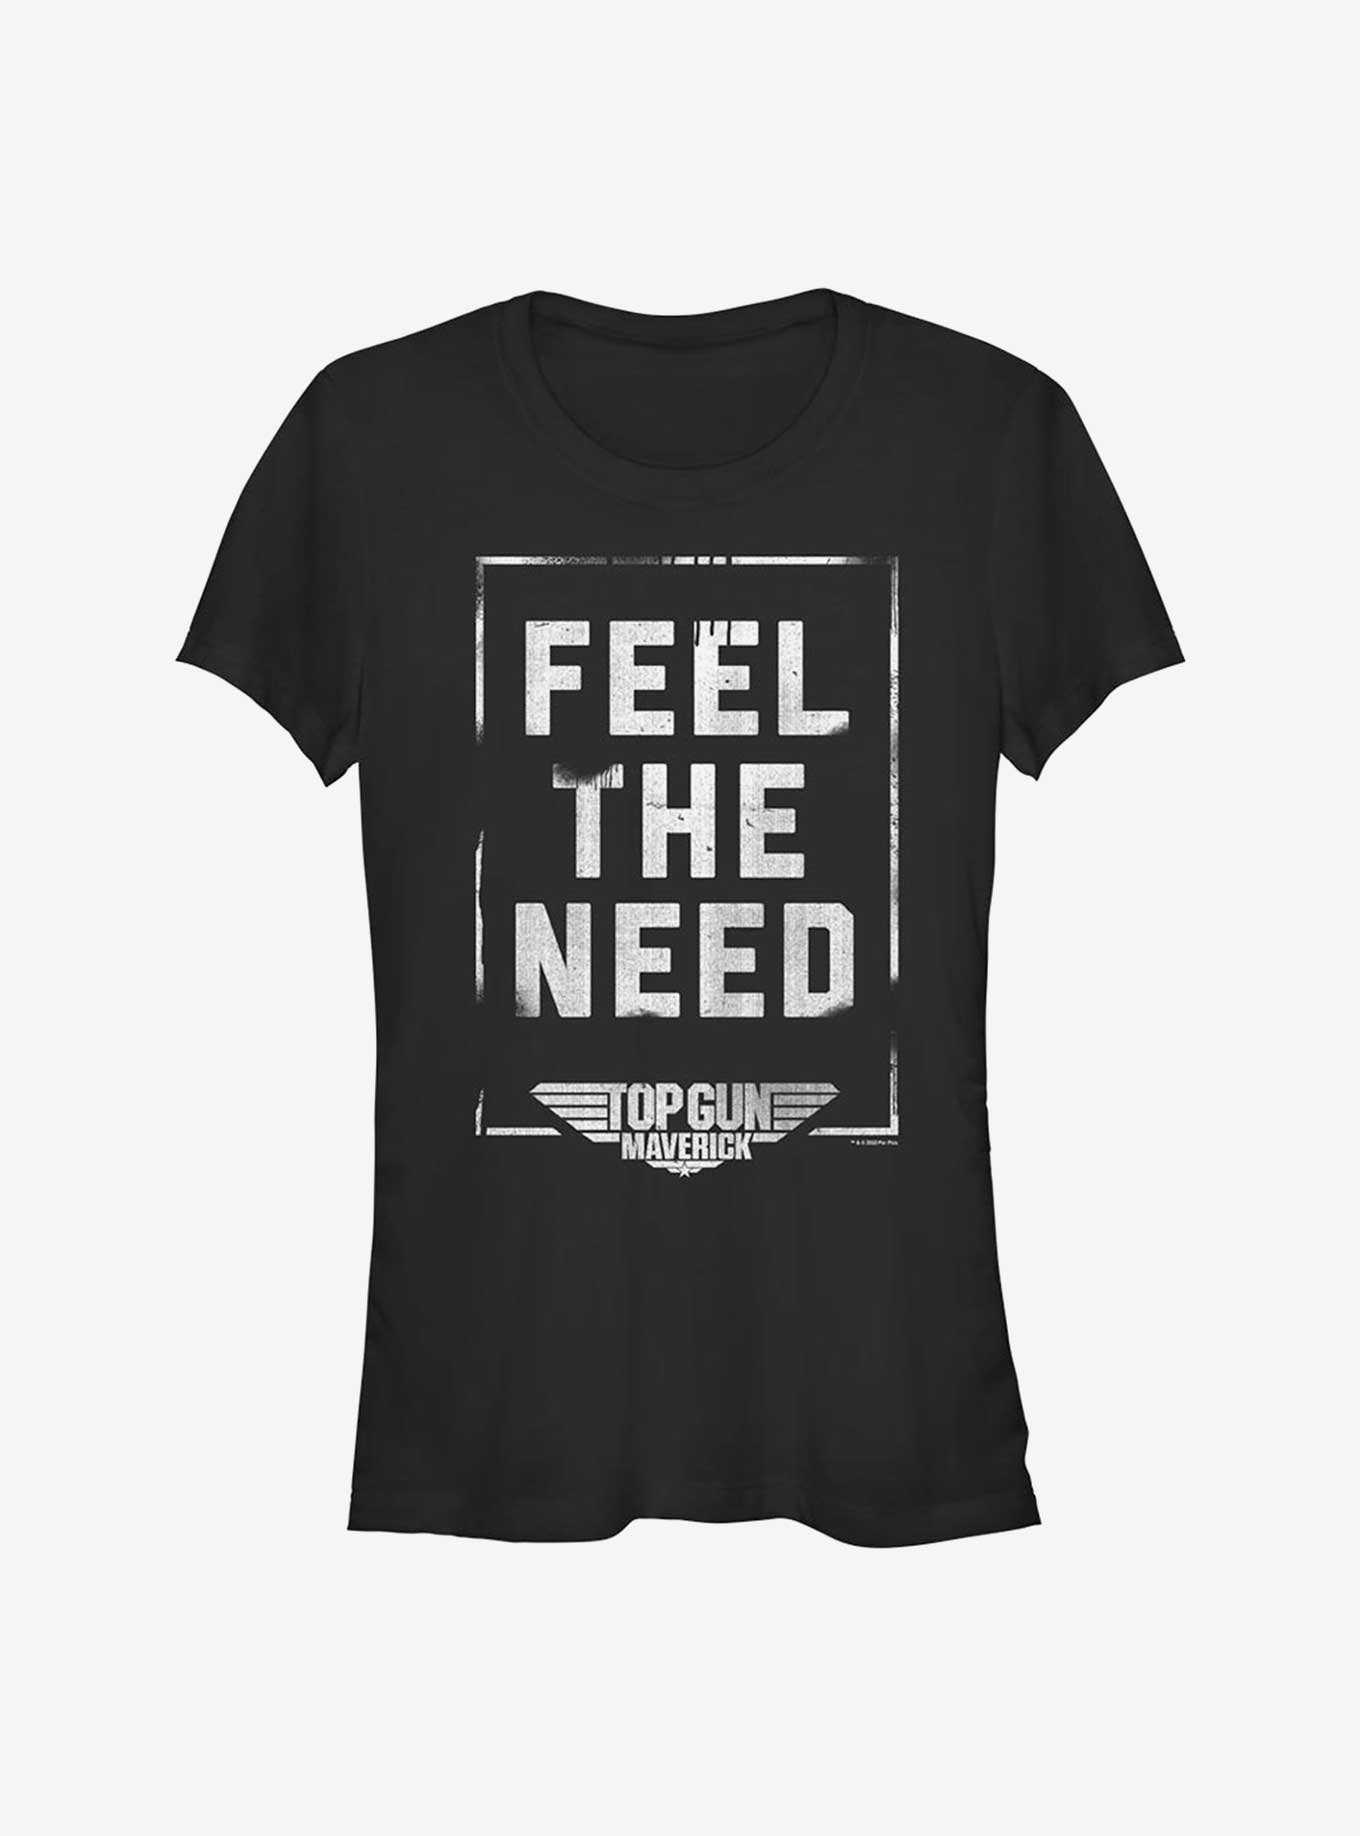 I Feel The Need The Need For Speed Top Gun Vintage Unisex T-shirt